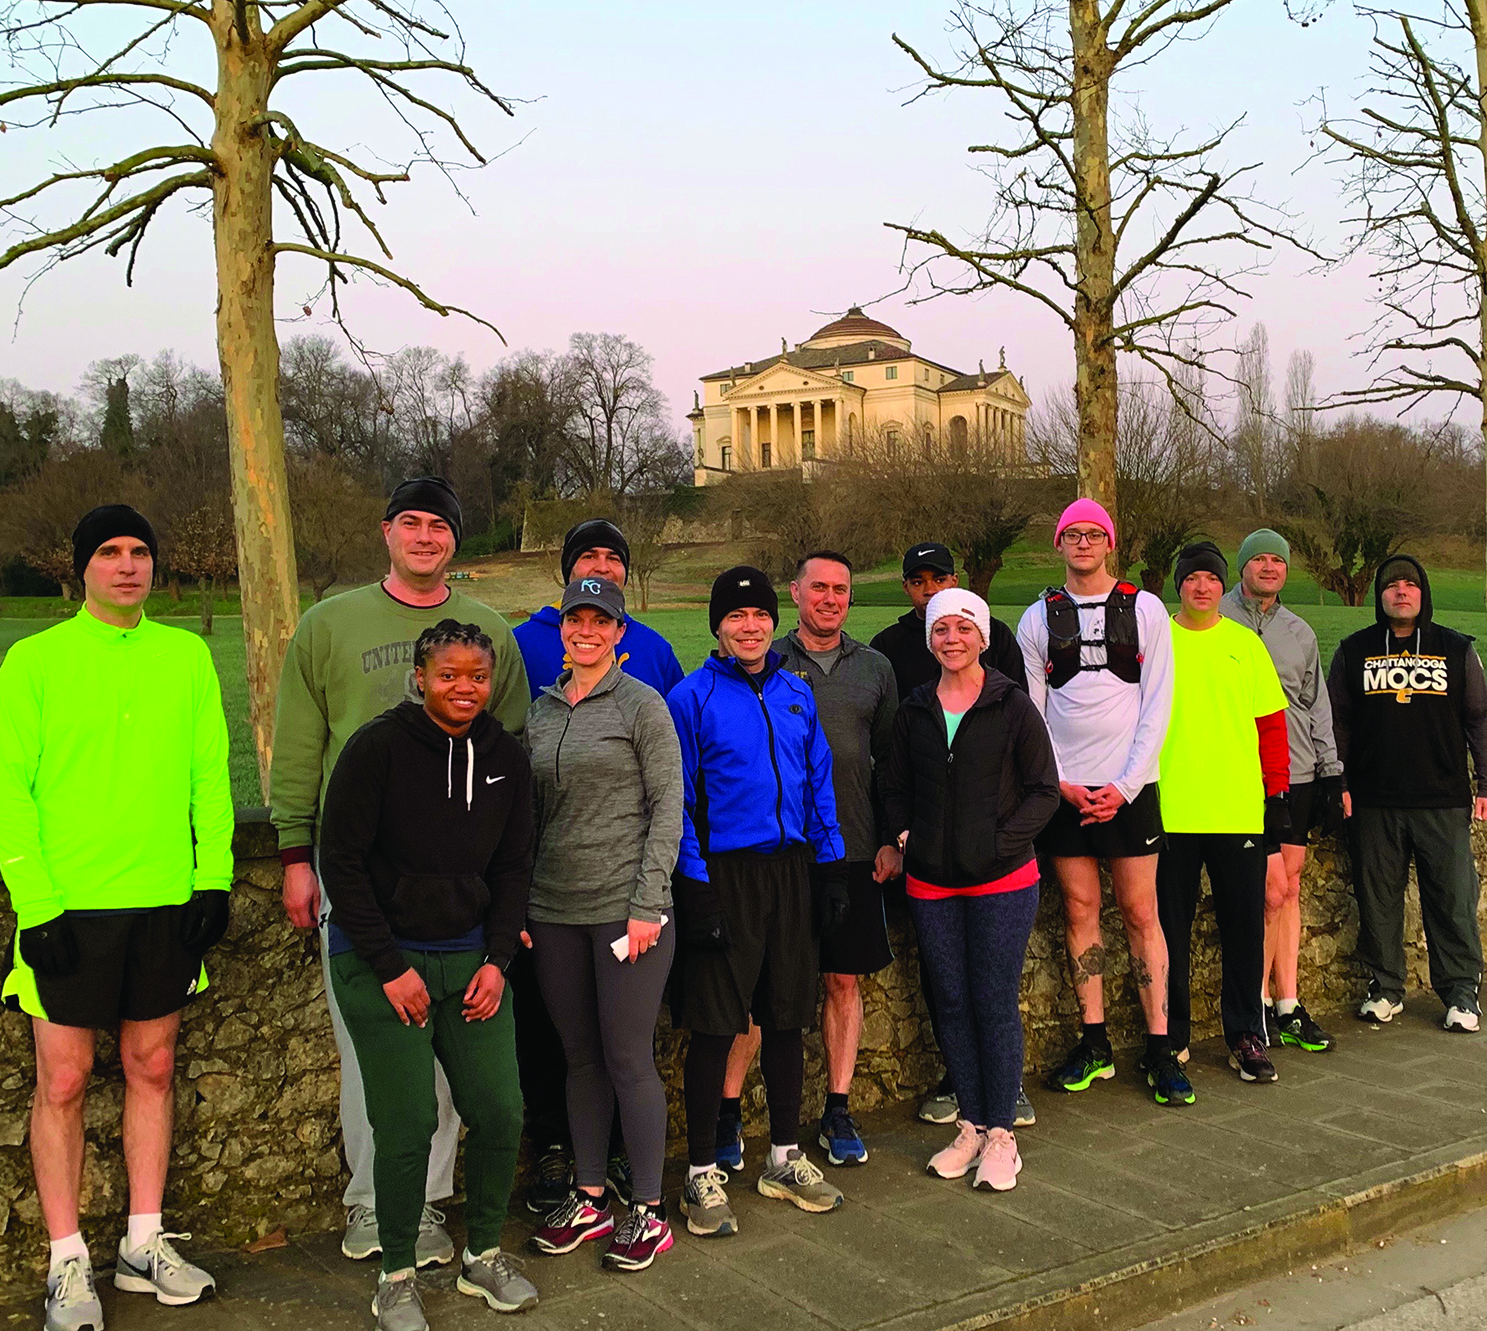 On 21 February 2020, the USARAF/SETAF OSJA completed their first Villa La Rotunda run. The Rotunda (in the background) was completed in 1592 and was designed by Andria Palladio, the architect whose designs were part of the inspiration for Thomas Jefferson when he was building Monticello just outside our beloved Charlottesville. 